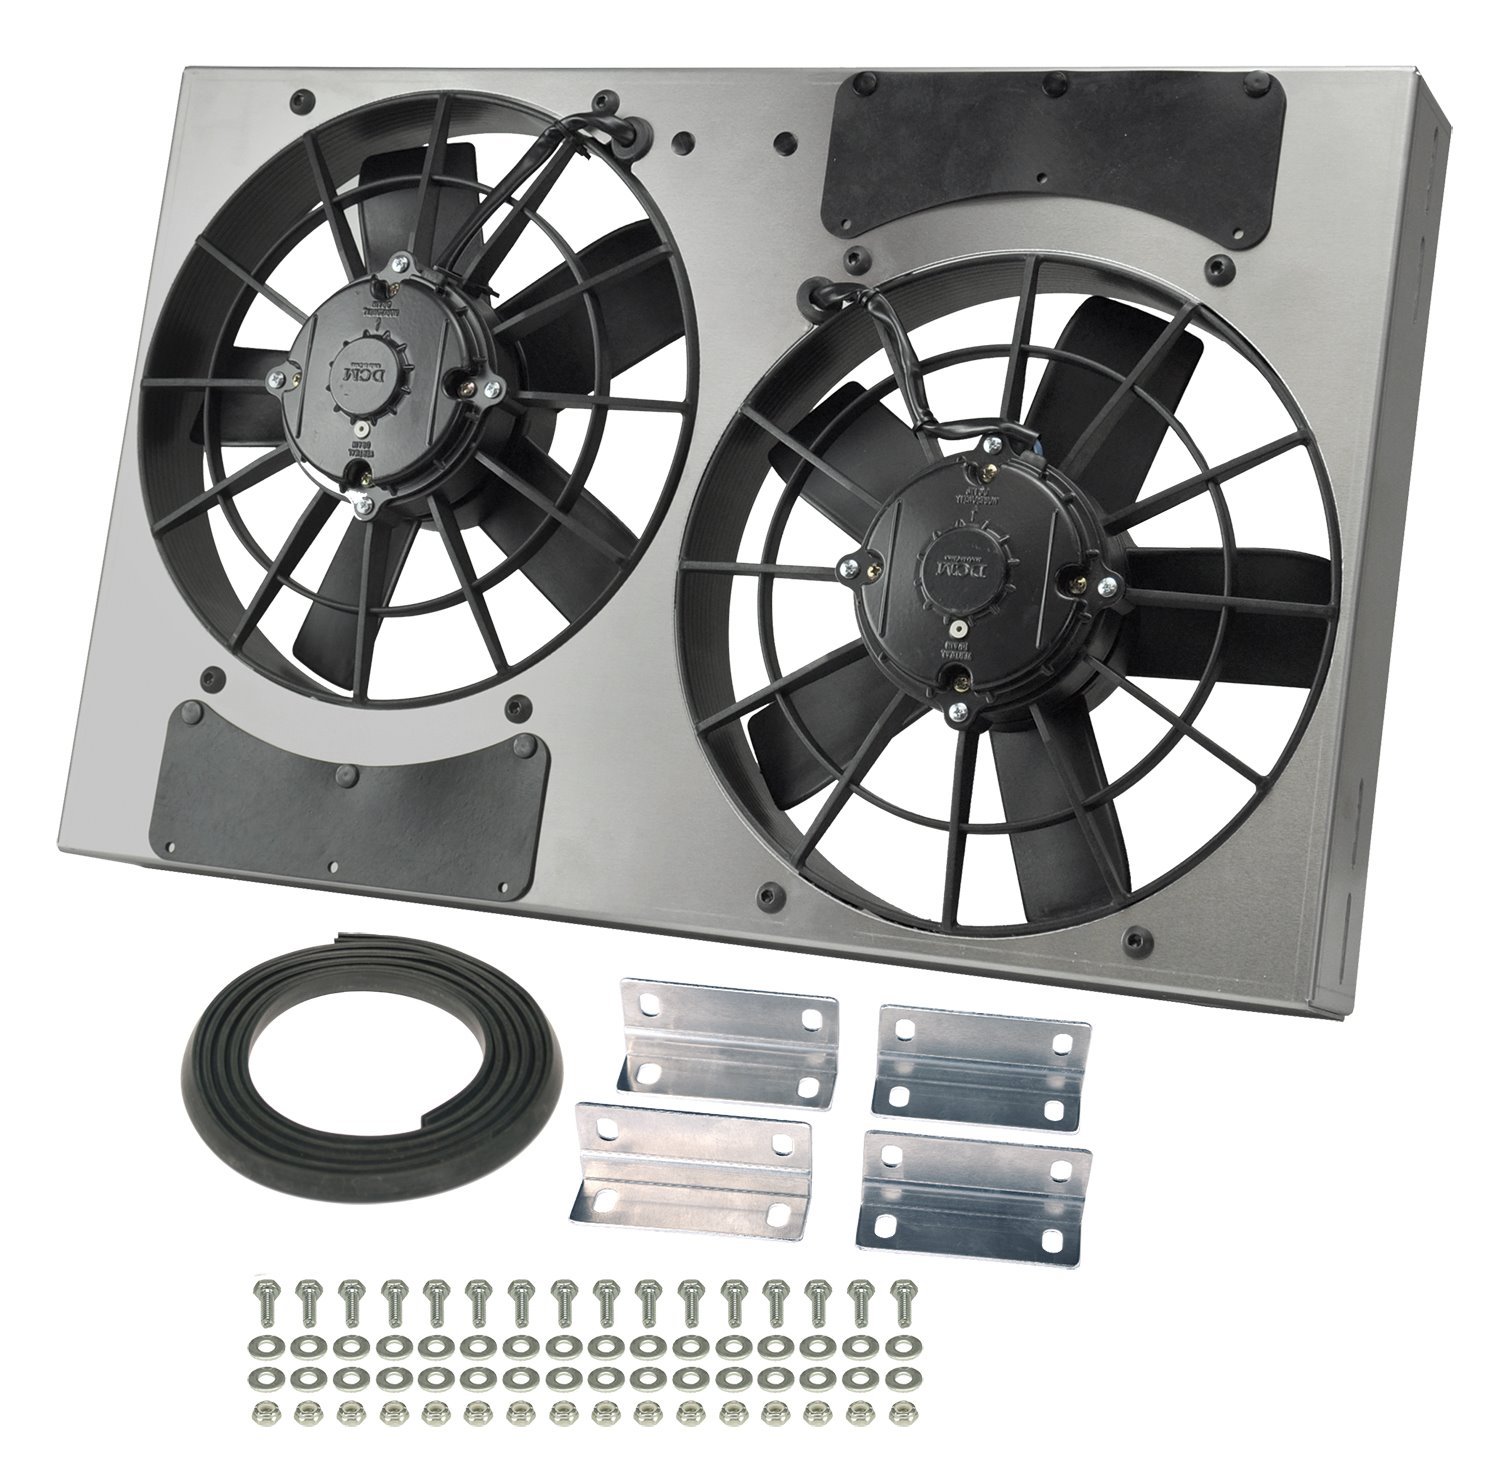 High-Output Dual Fan Assembly CFM: 3750